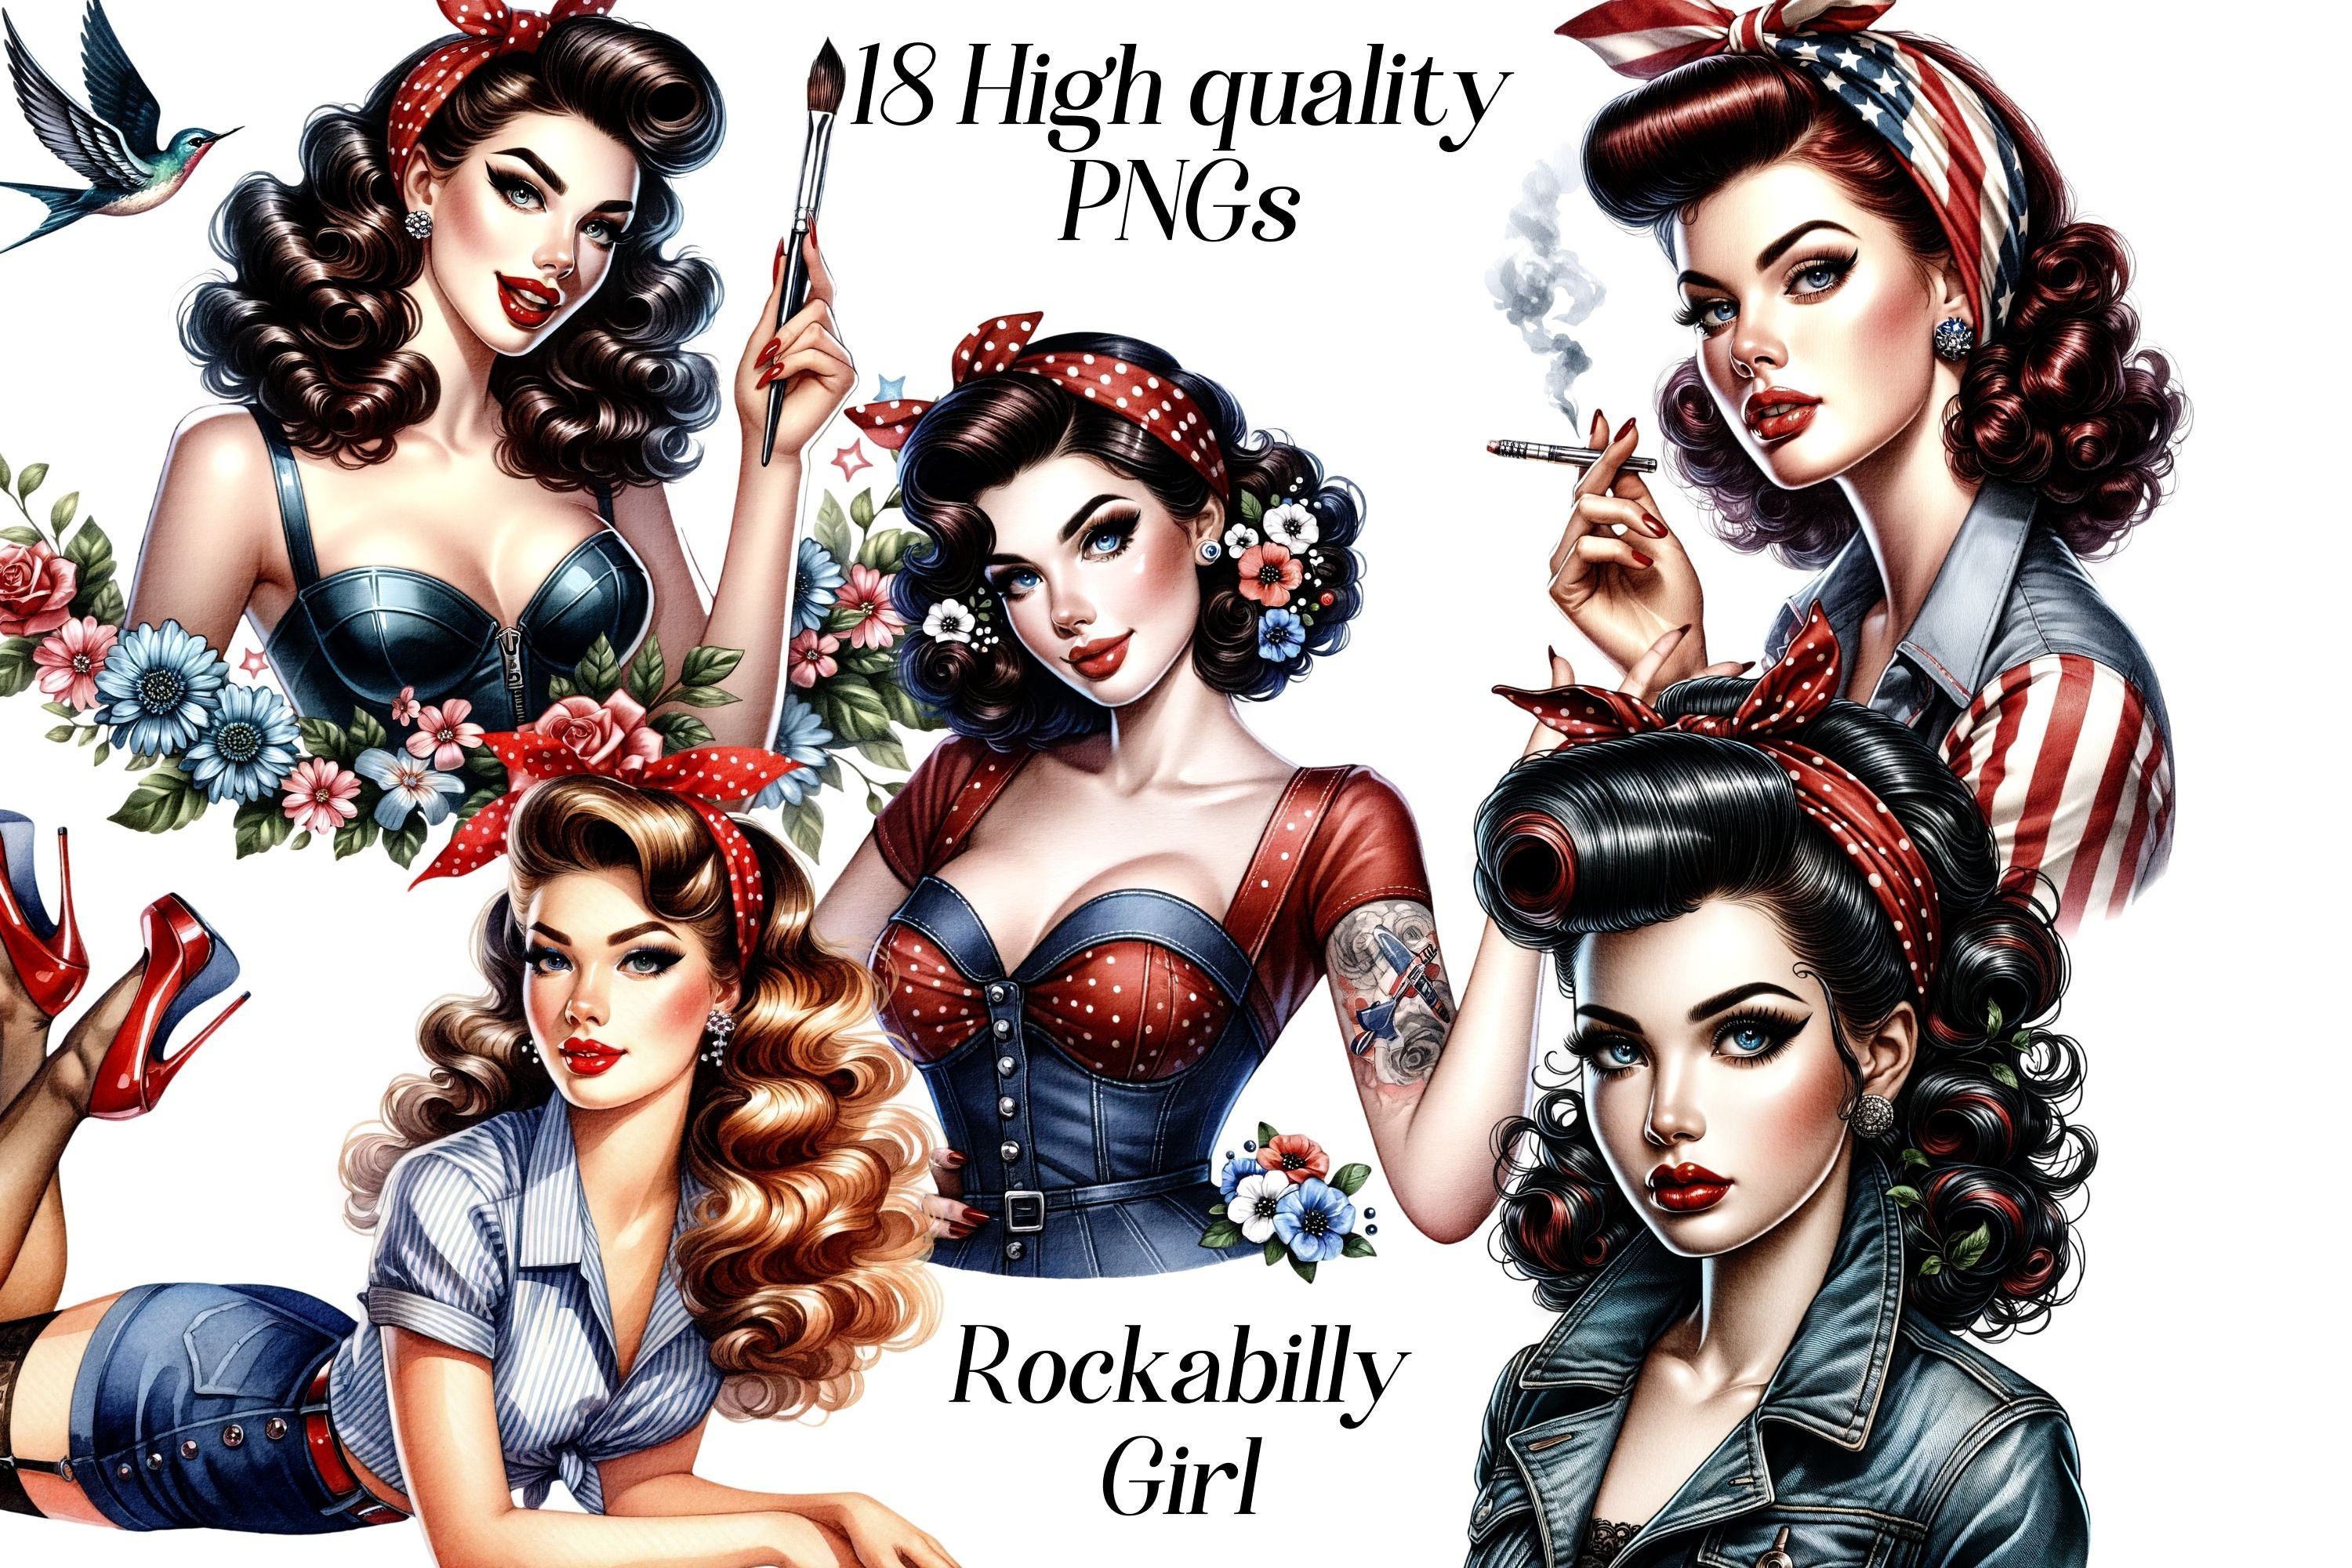 A Big Picture of a Gorgeous Rockabilly Women's Black Queen